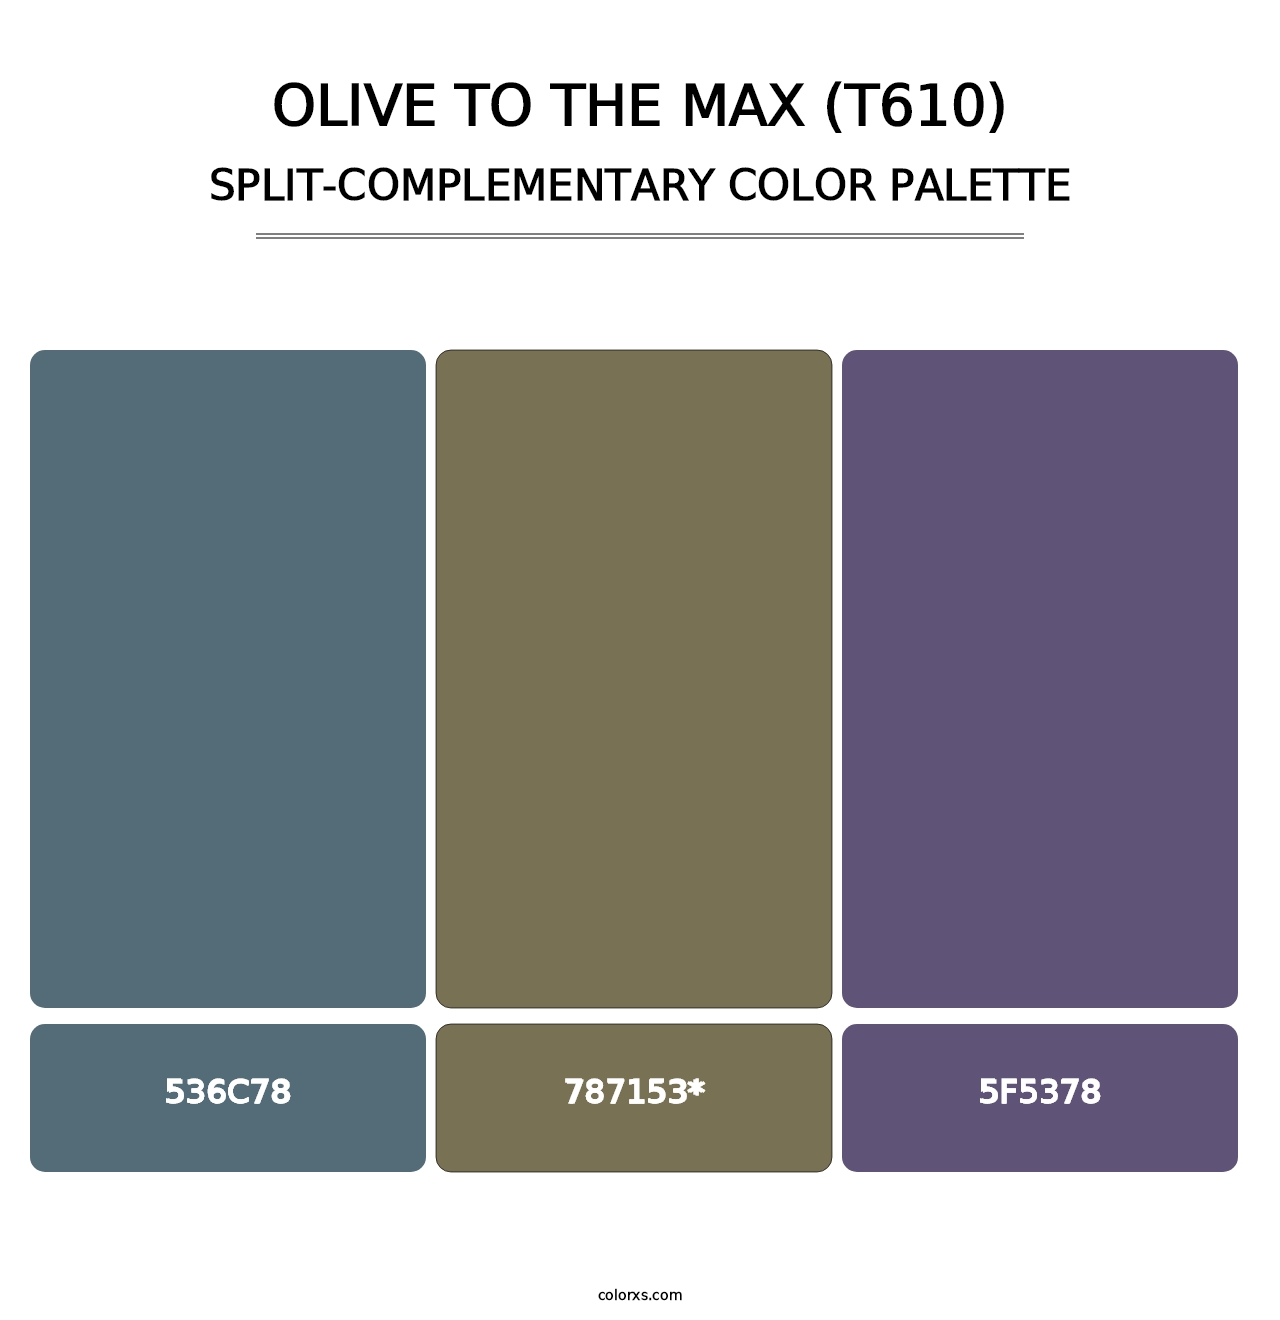 Olive to the Max (T610) - Split-Complementary Color Palette